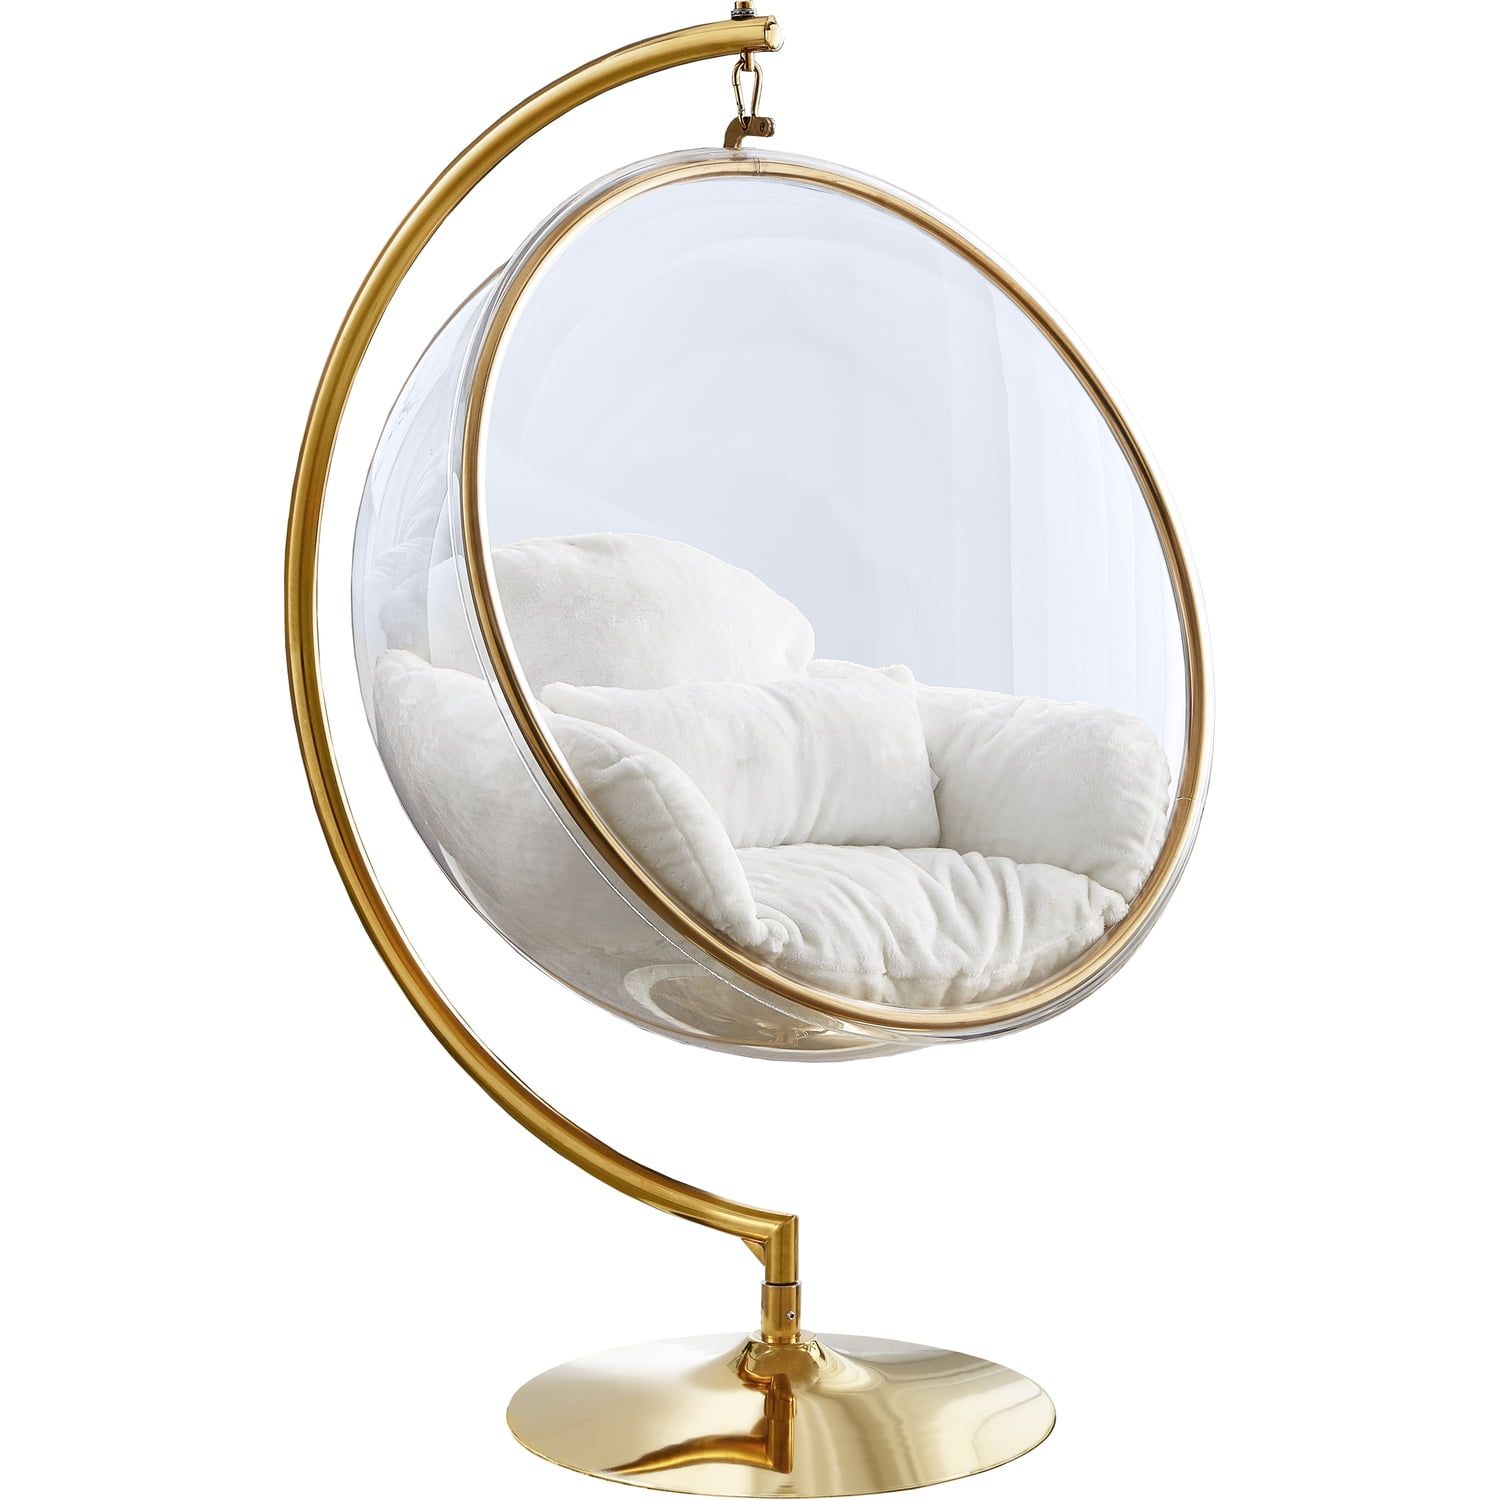 Contemporary Luna Gold Metal & White Faux Fur Acrylic Swing Chair